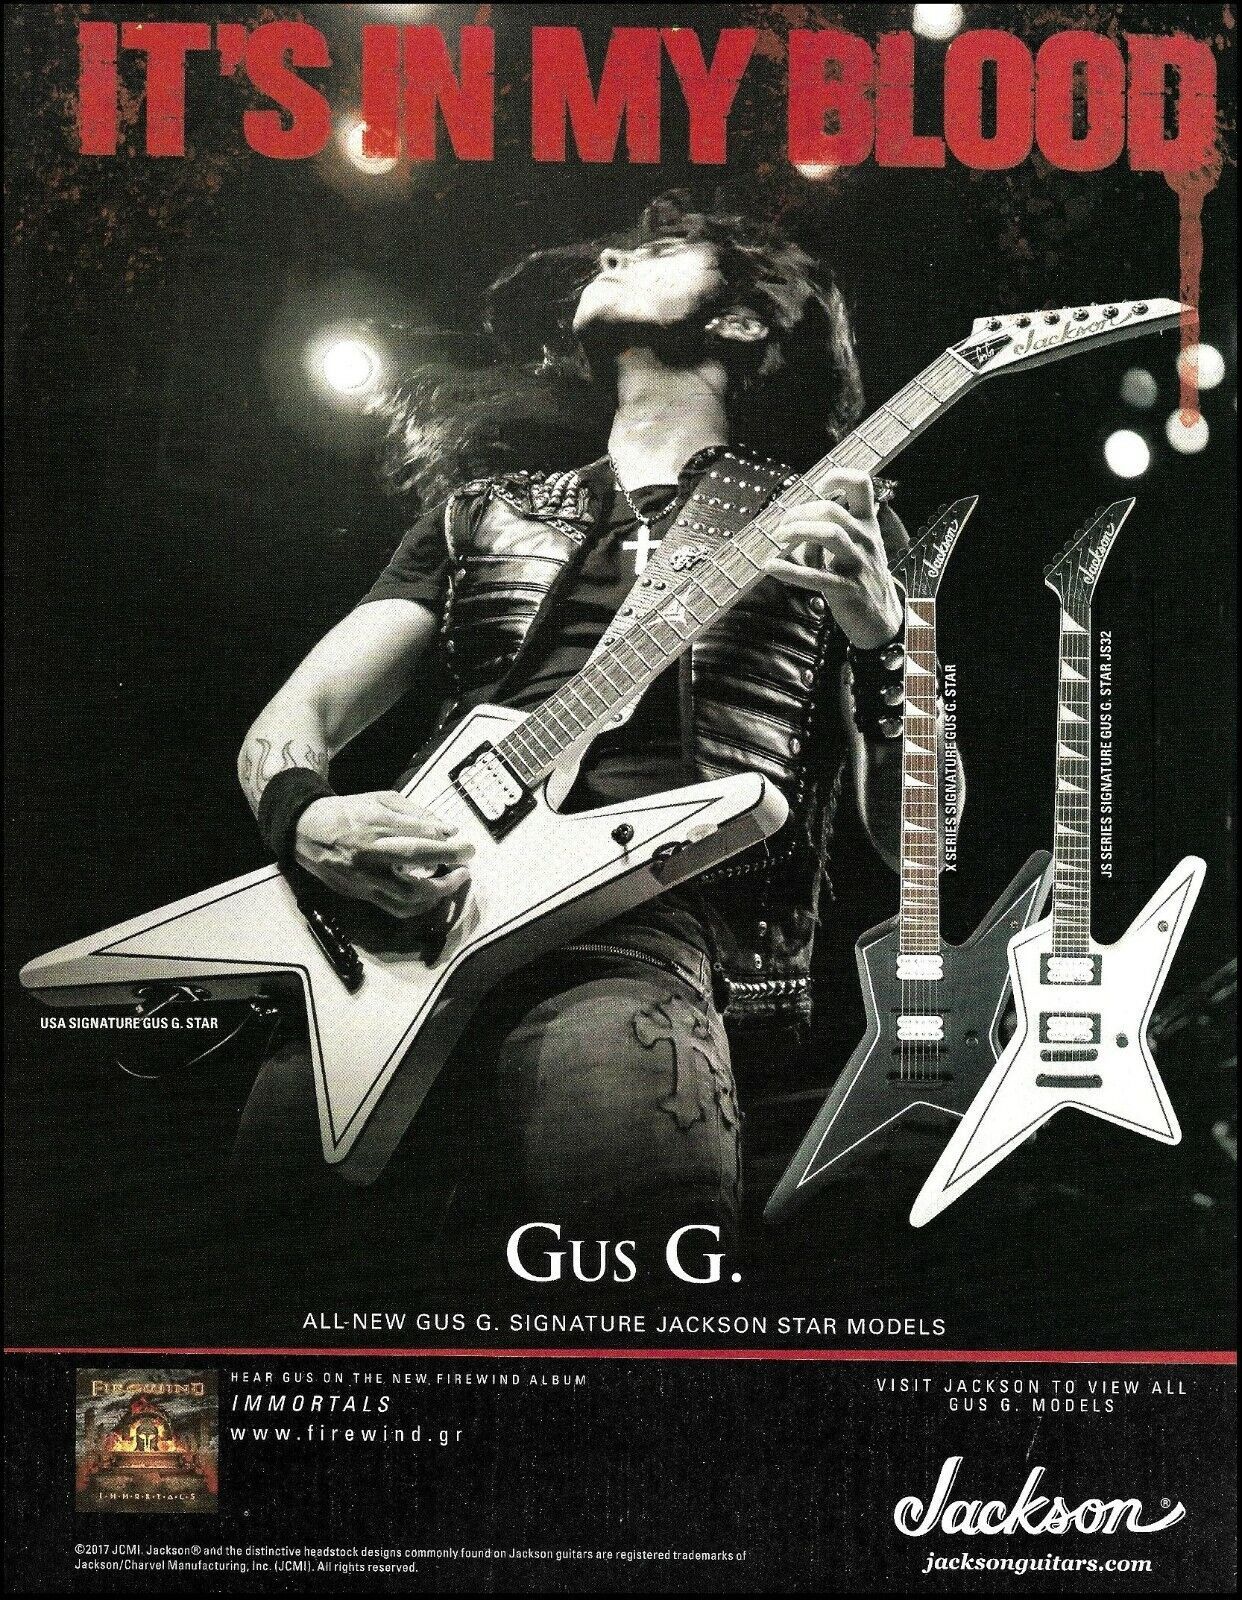 Primary image for Firewind Immortals Gus G. Signature Jackson JS & X Series Star Guitar ad print